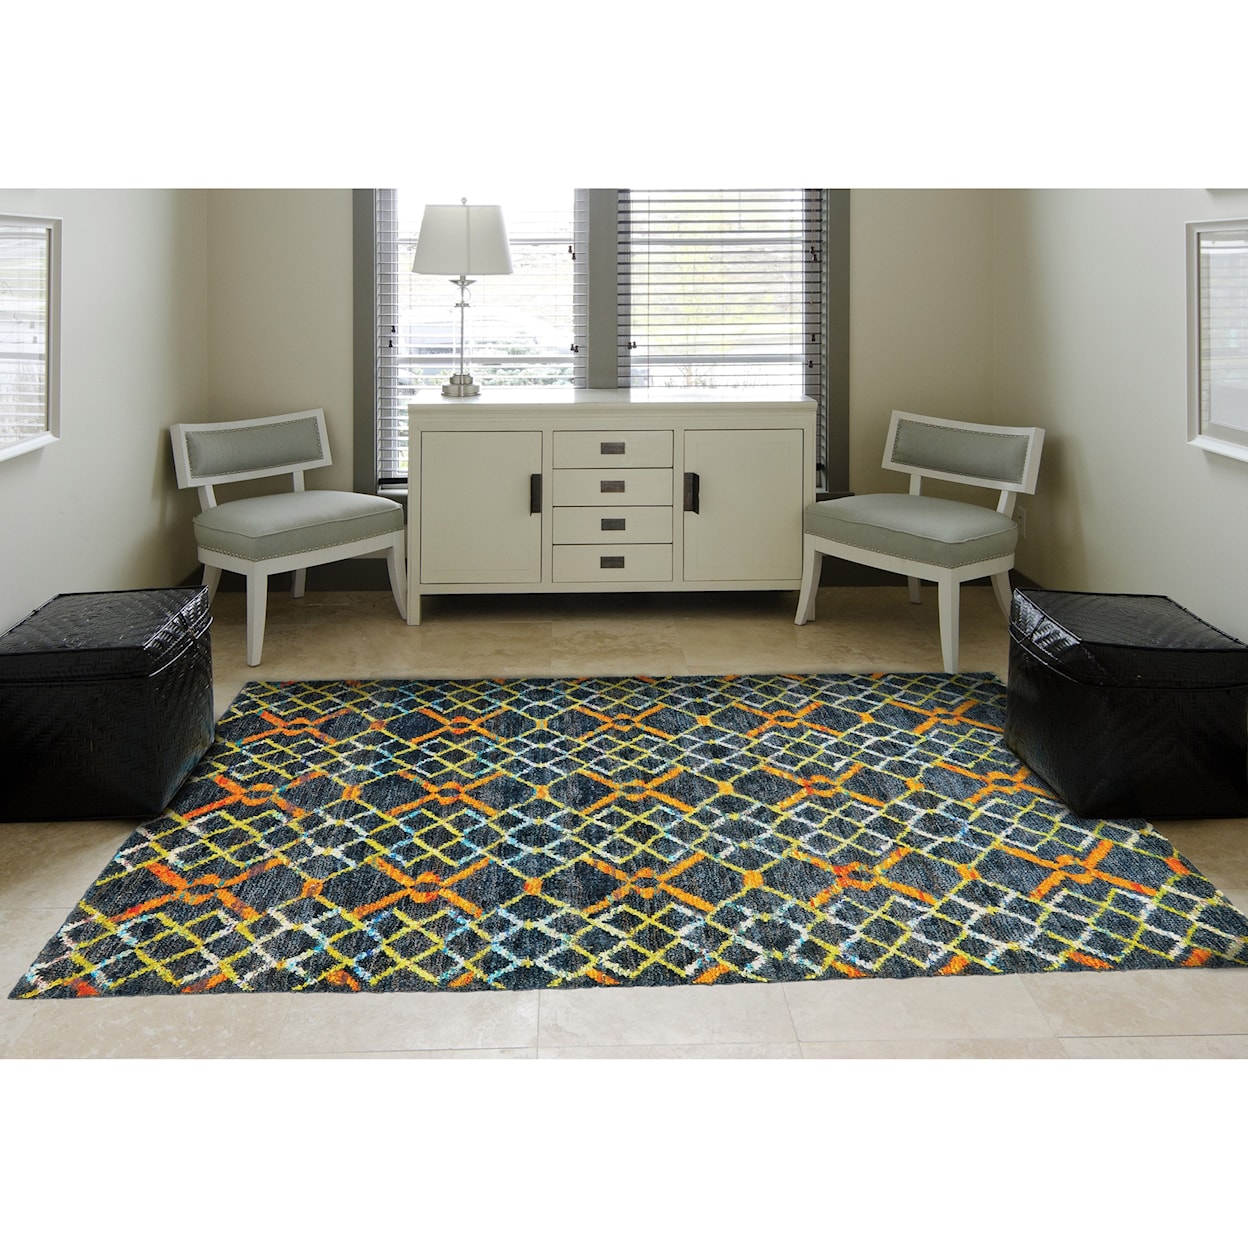 Feizy Rugs Tortola Amber 9'-6" x 13'-6" Area Rug